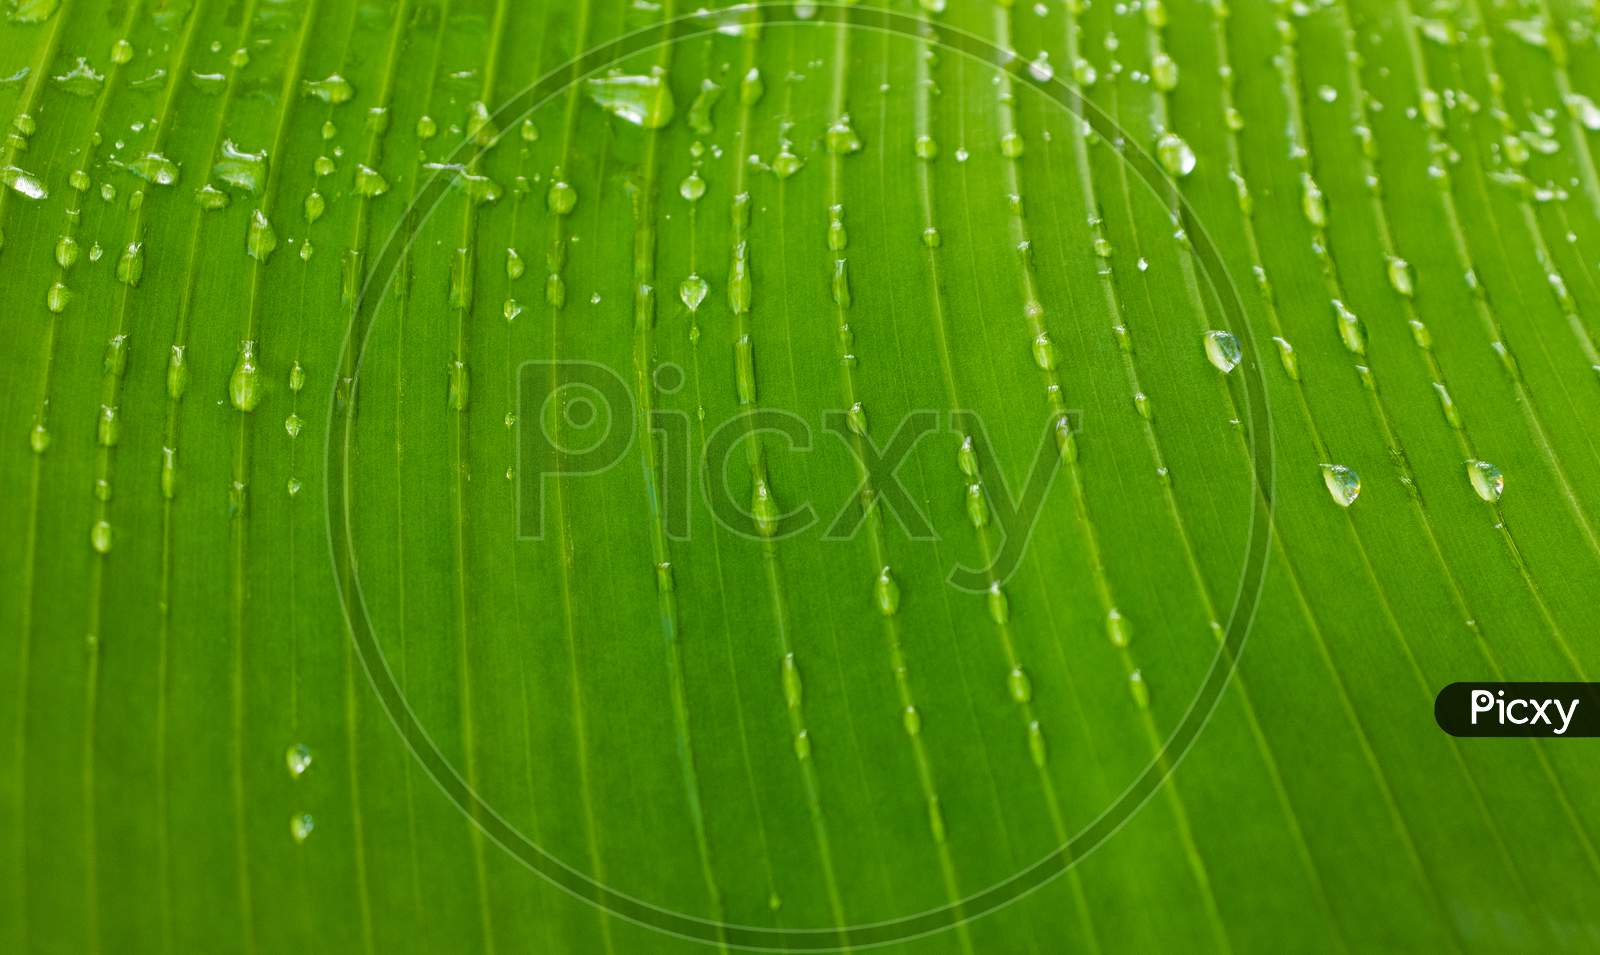 Banana Leaf With Water Droplets On It